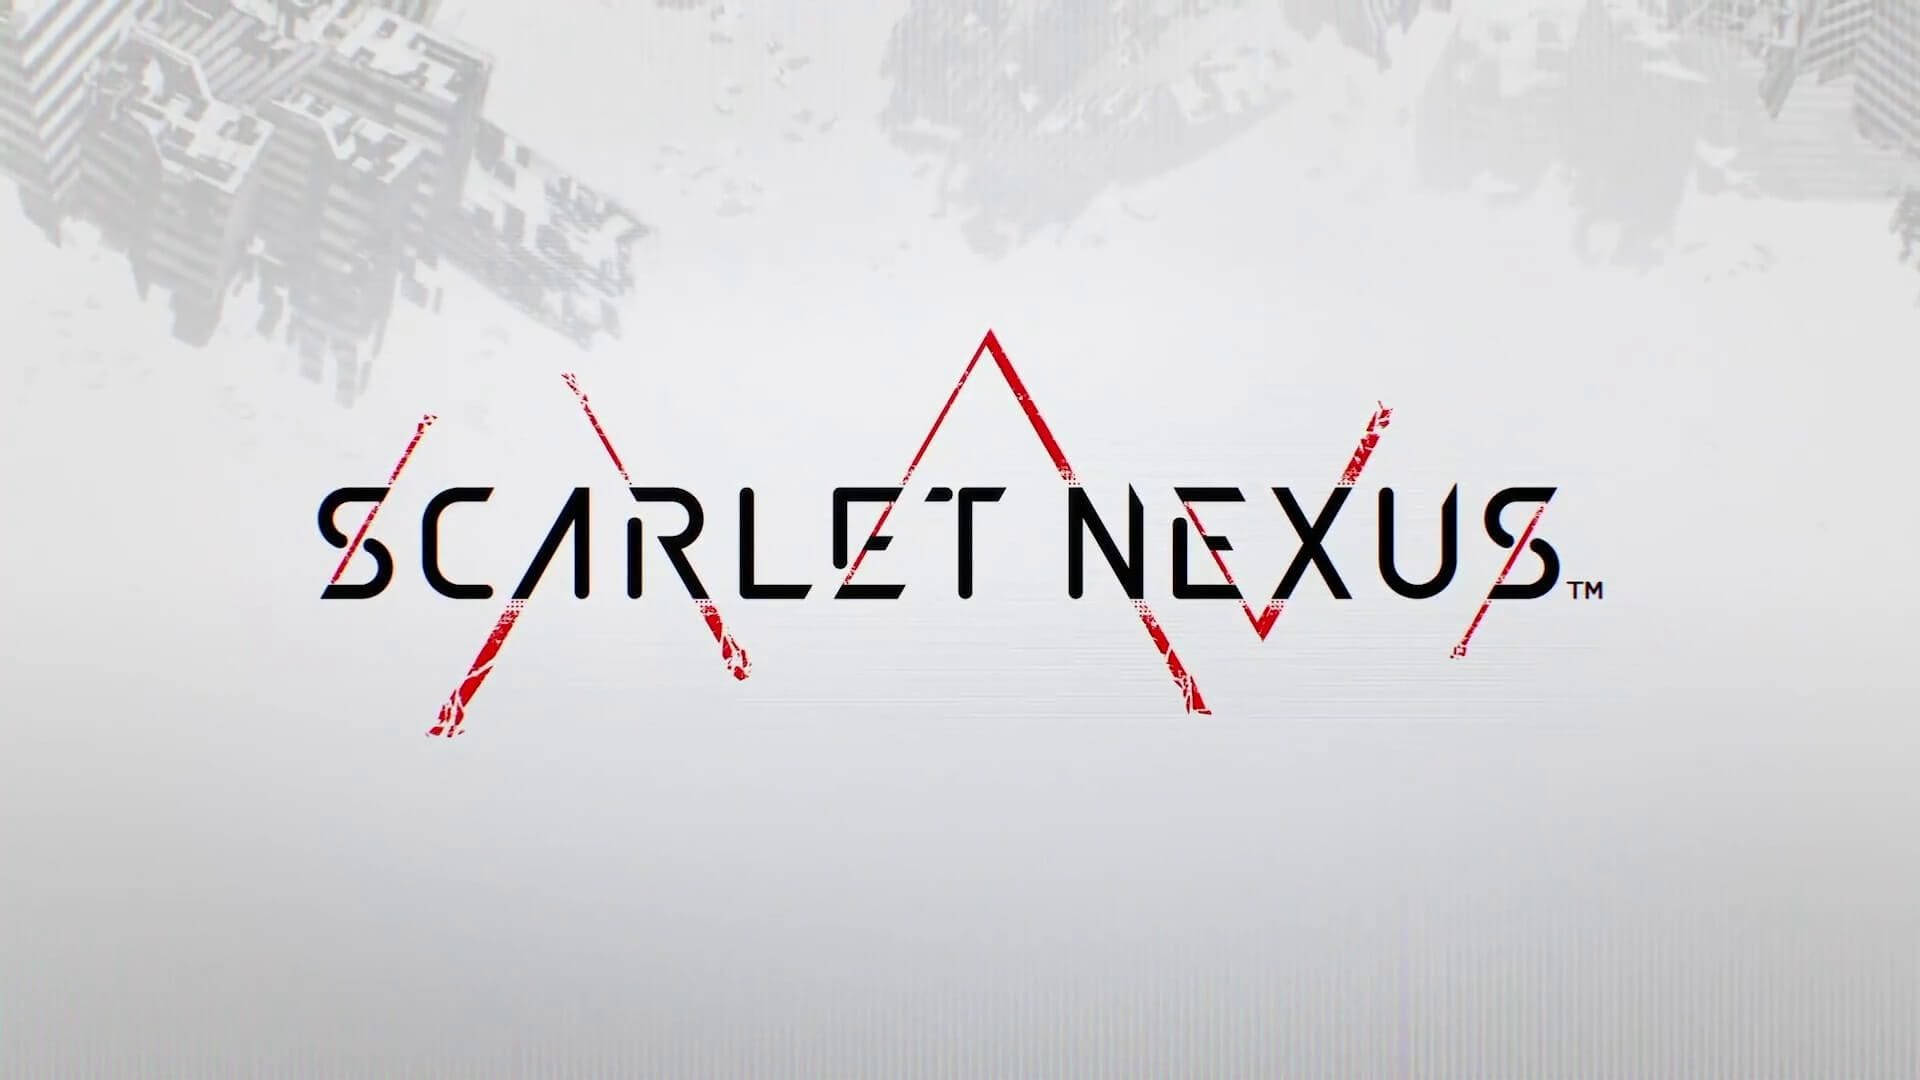 Scarlet Nexus 1920X1080 Wallpaper and Background Image